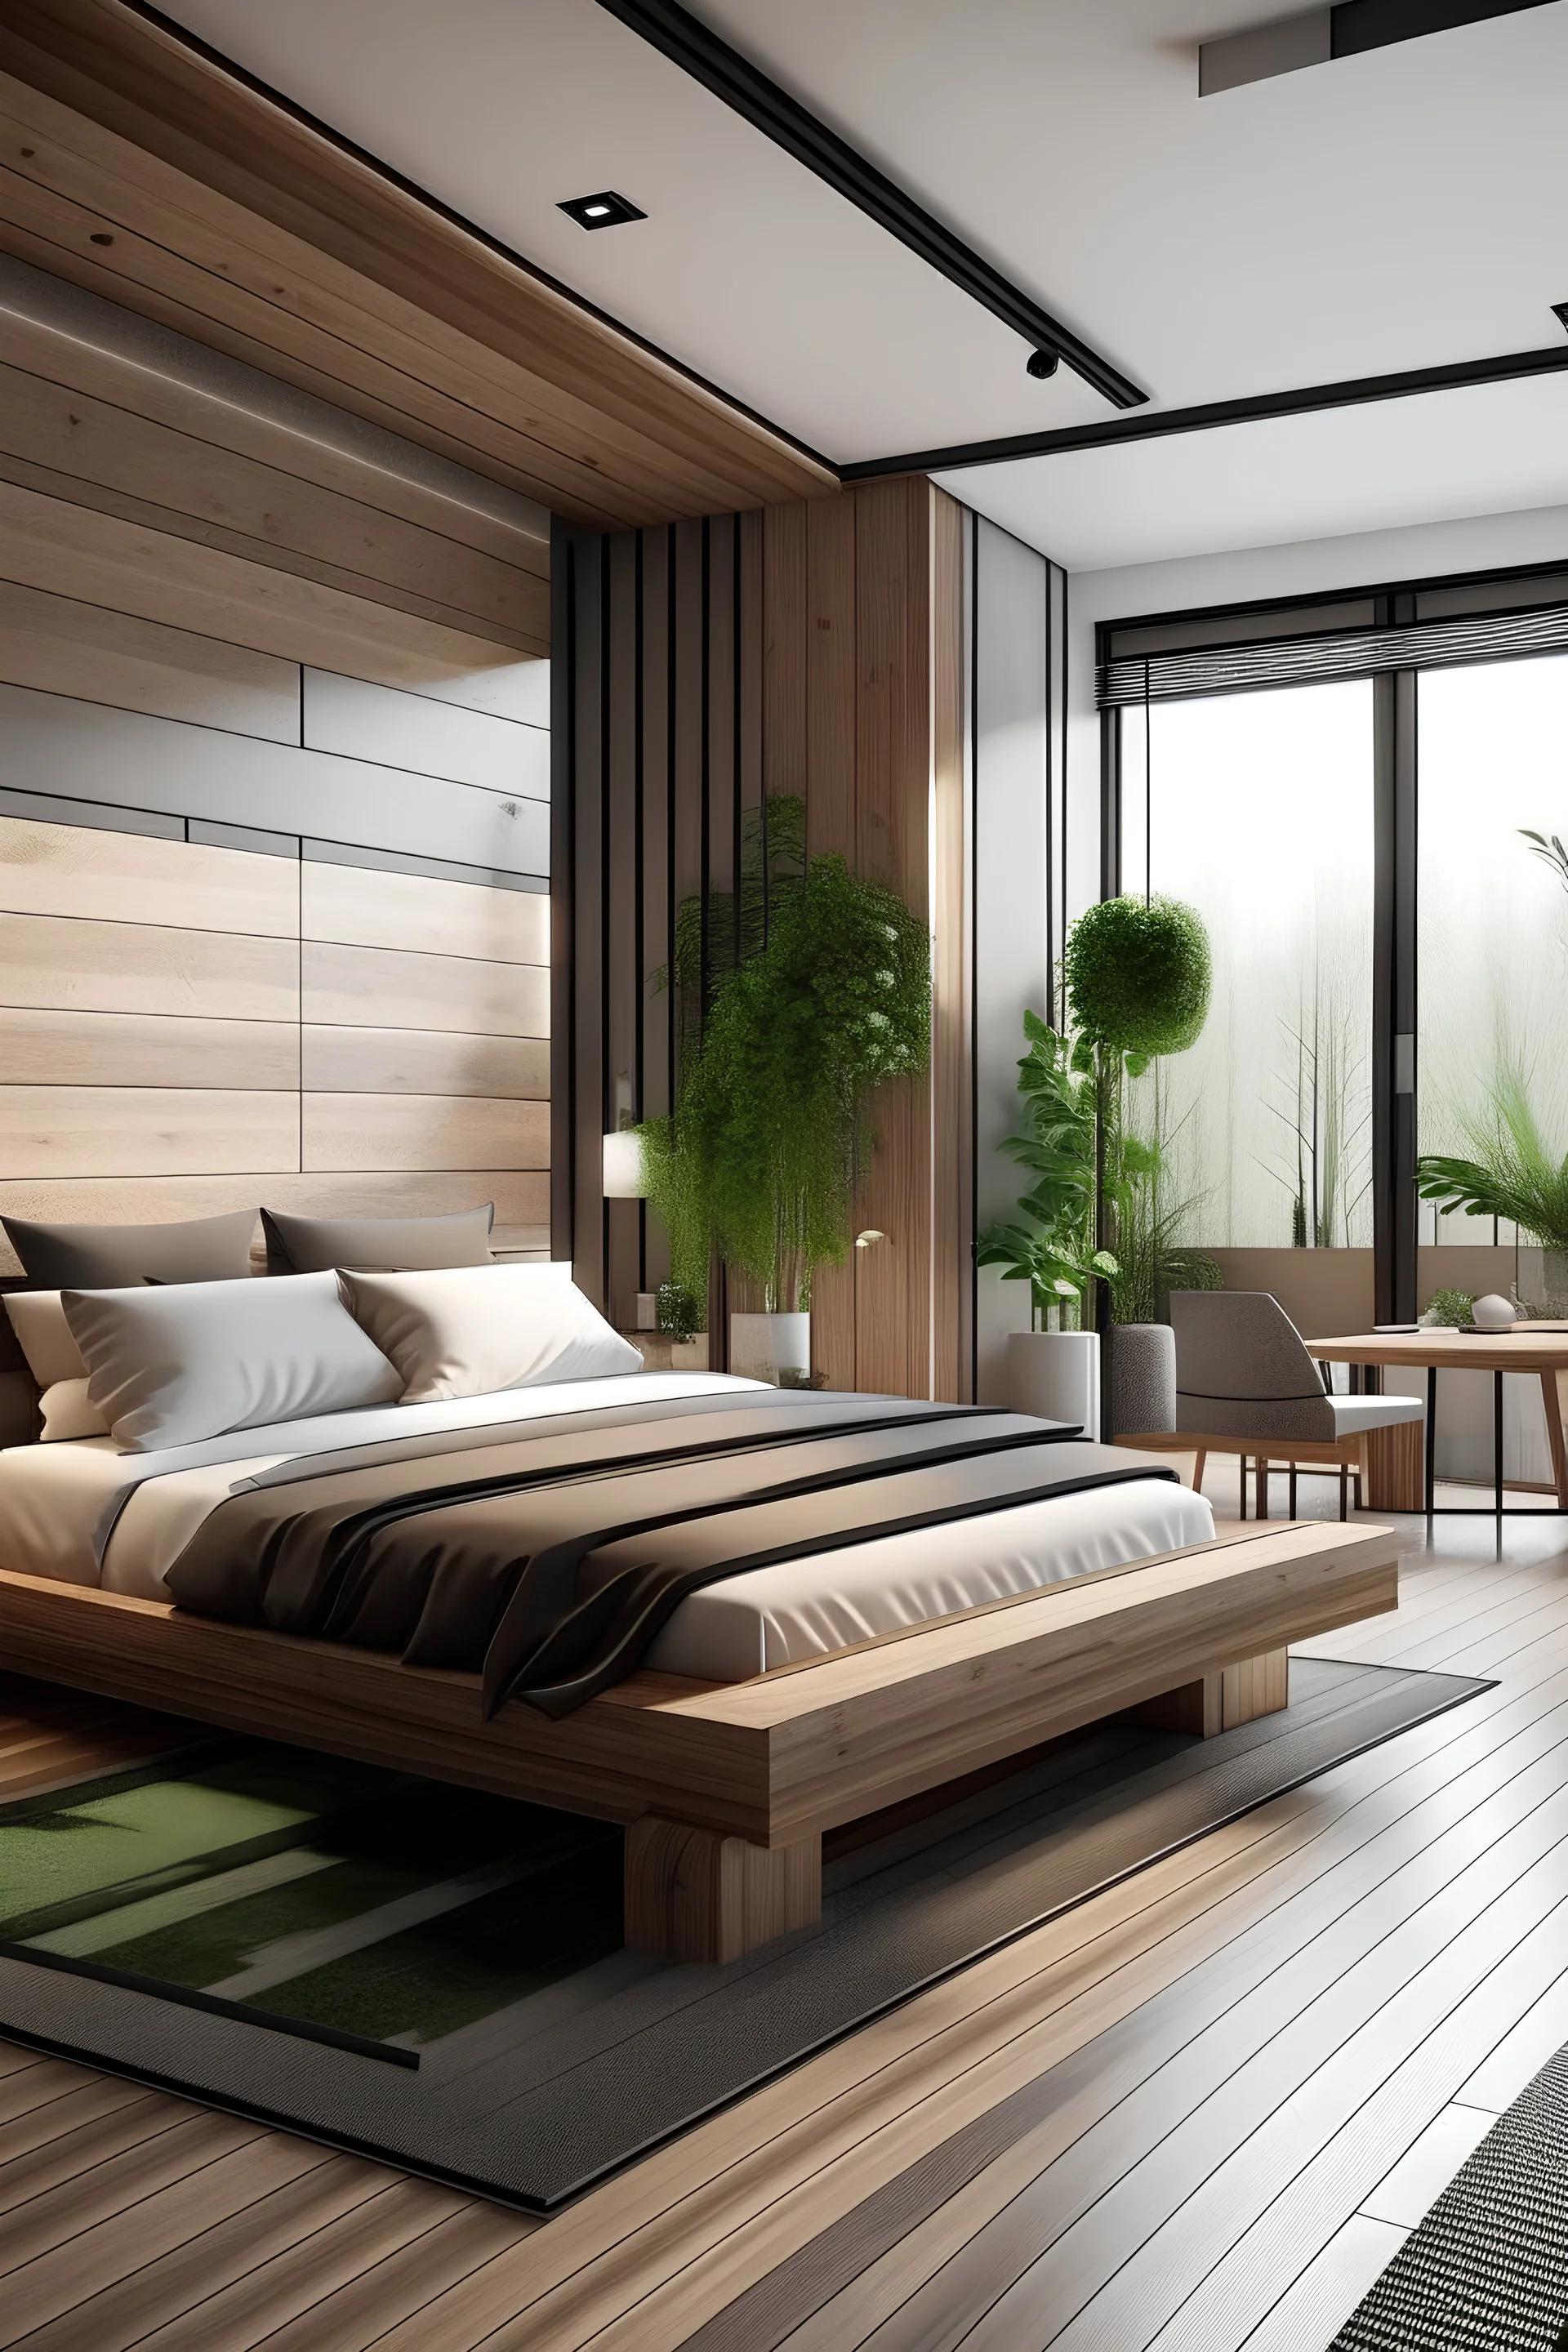 generate a modern master bedroom, with interior design, wood, plants, a chimney and a bathroom